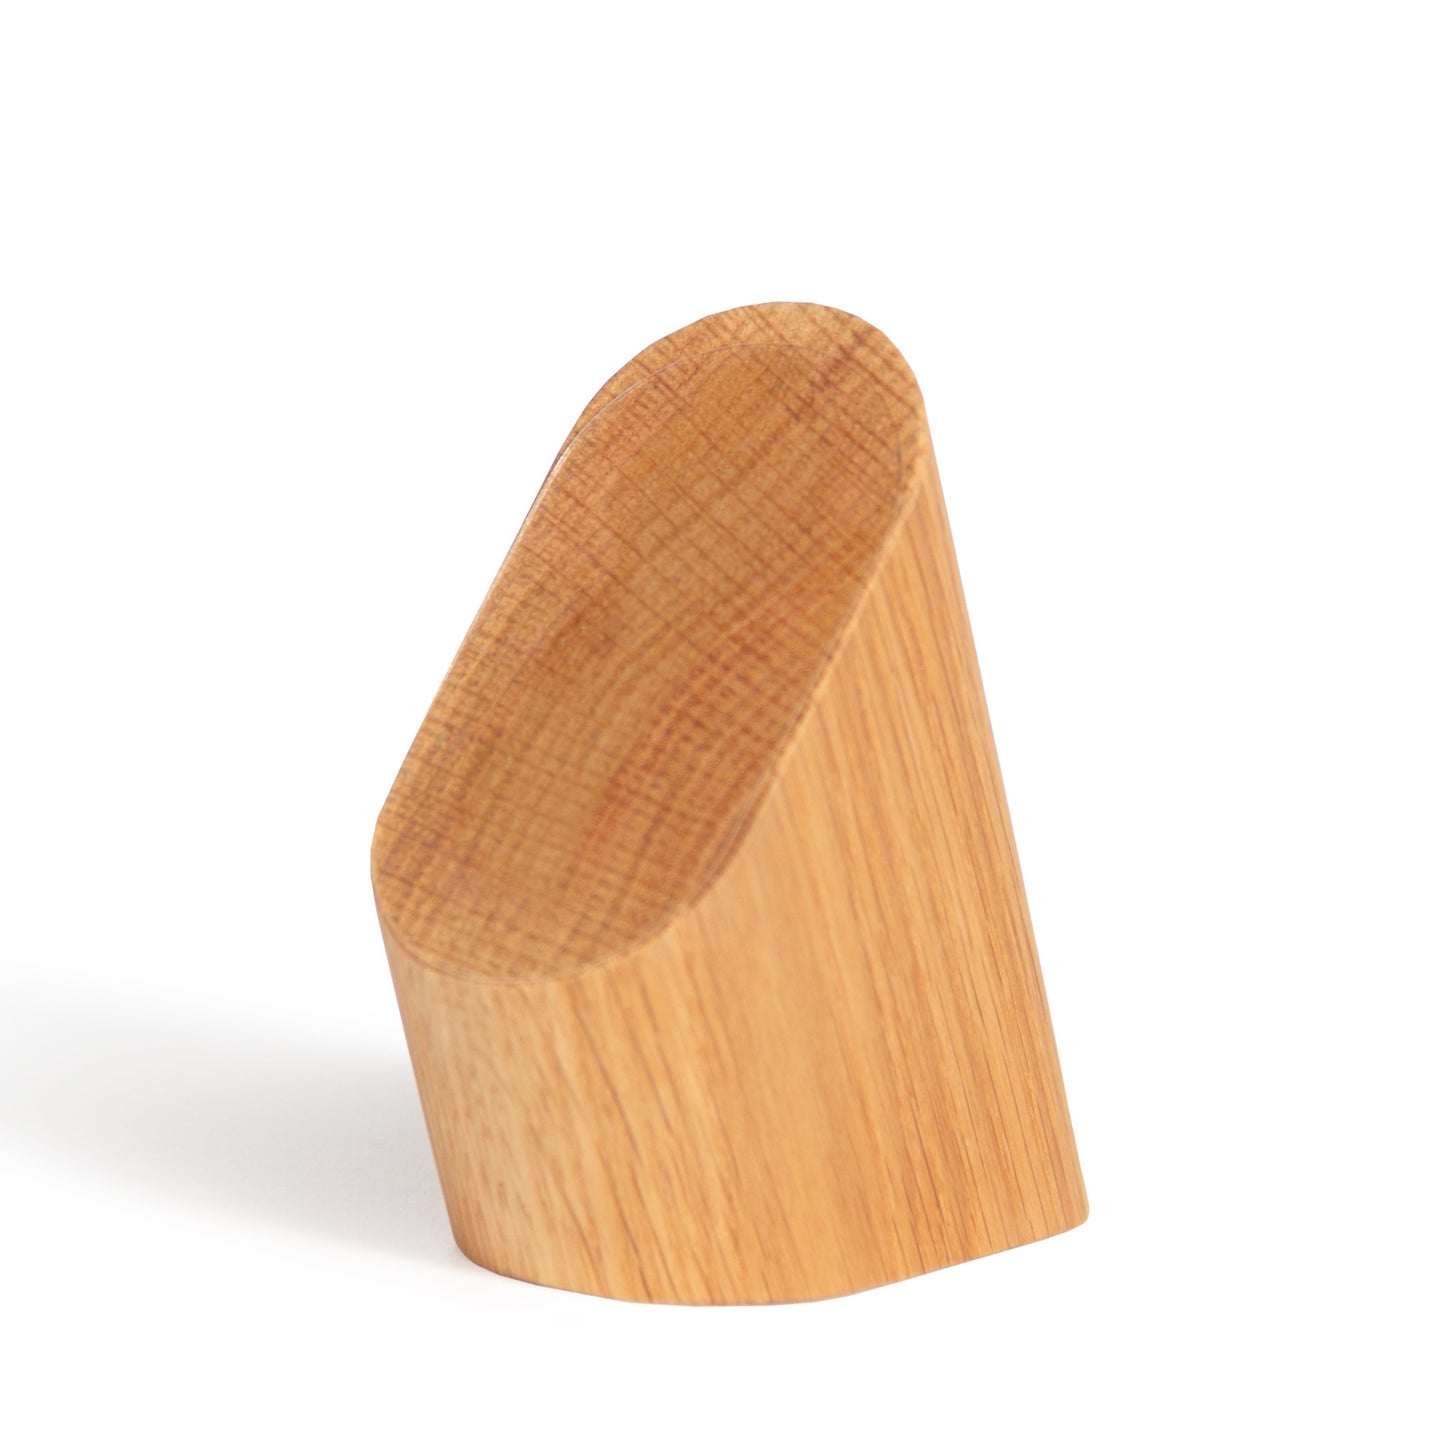 oak risco stand by woodendot, on white background